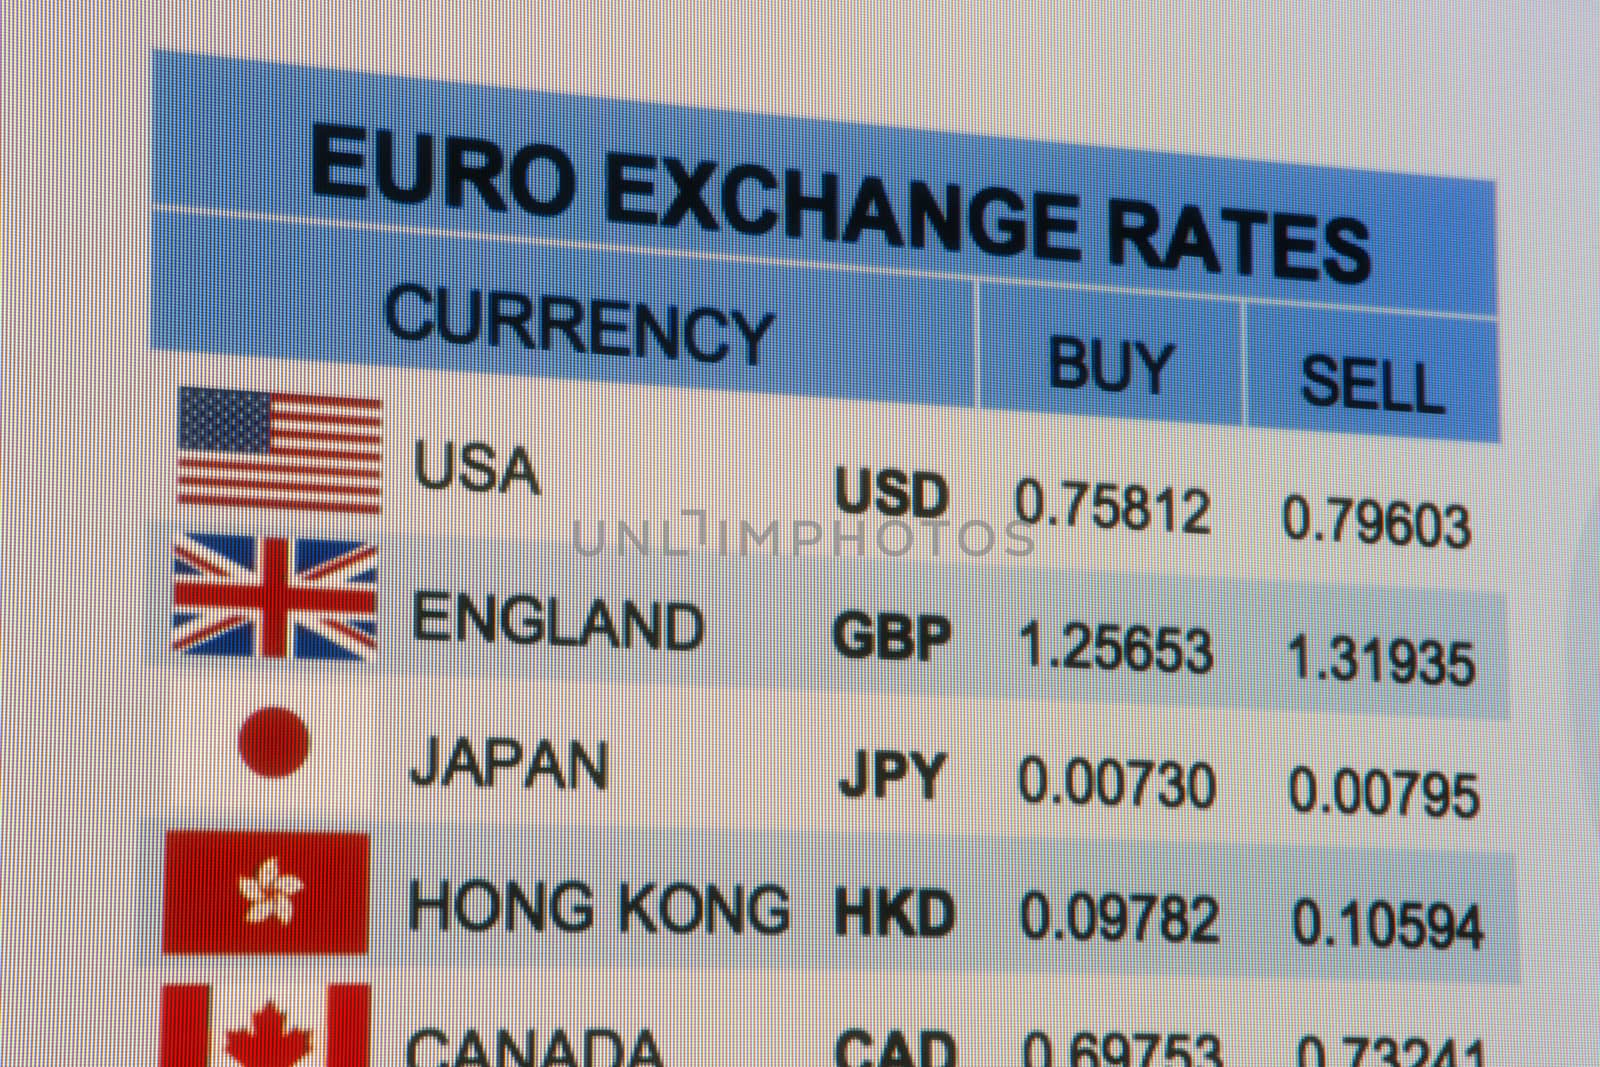 information of EURO exchange rates on screen display